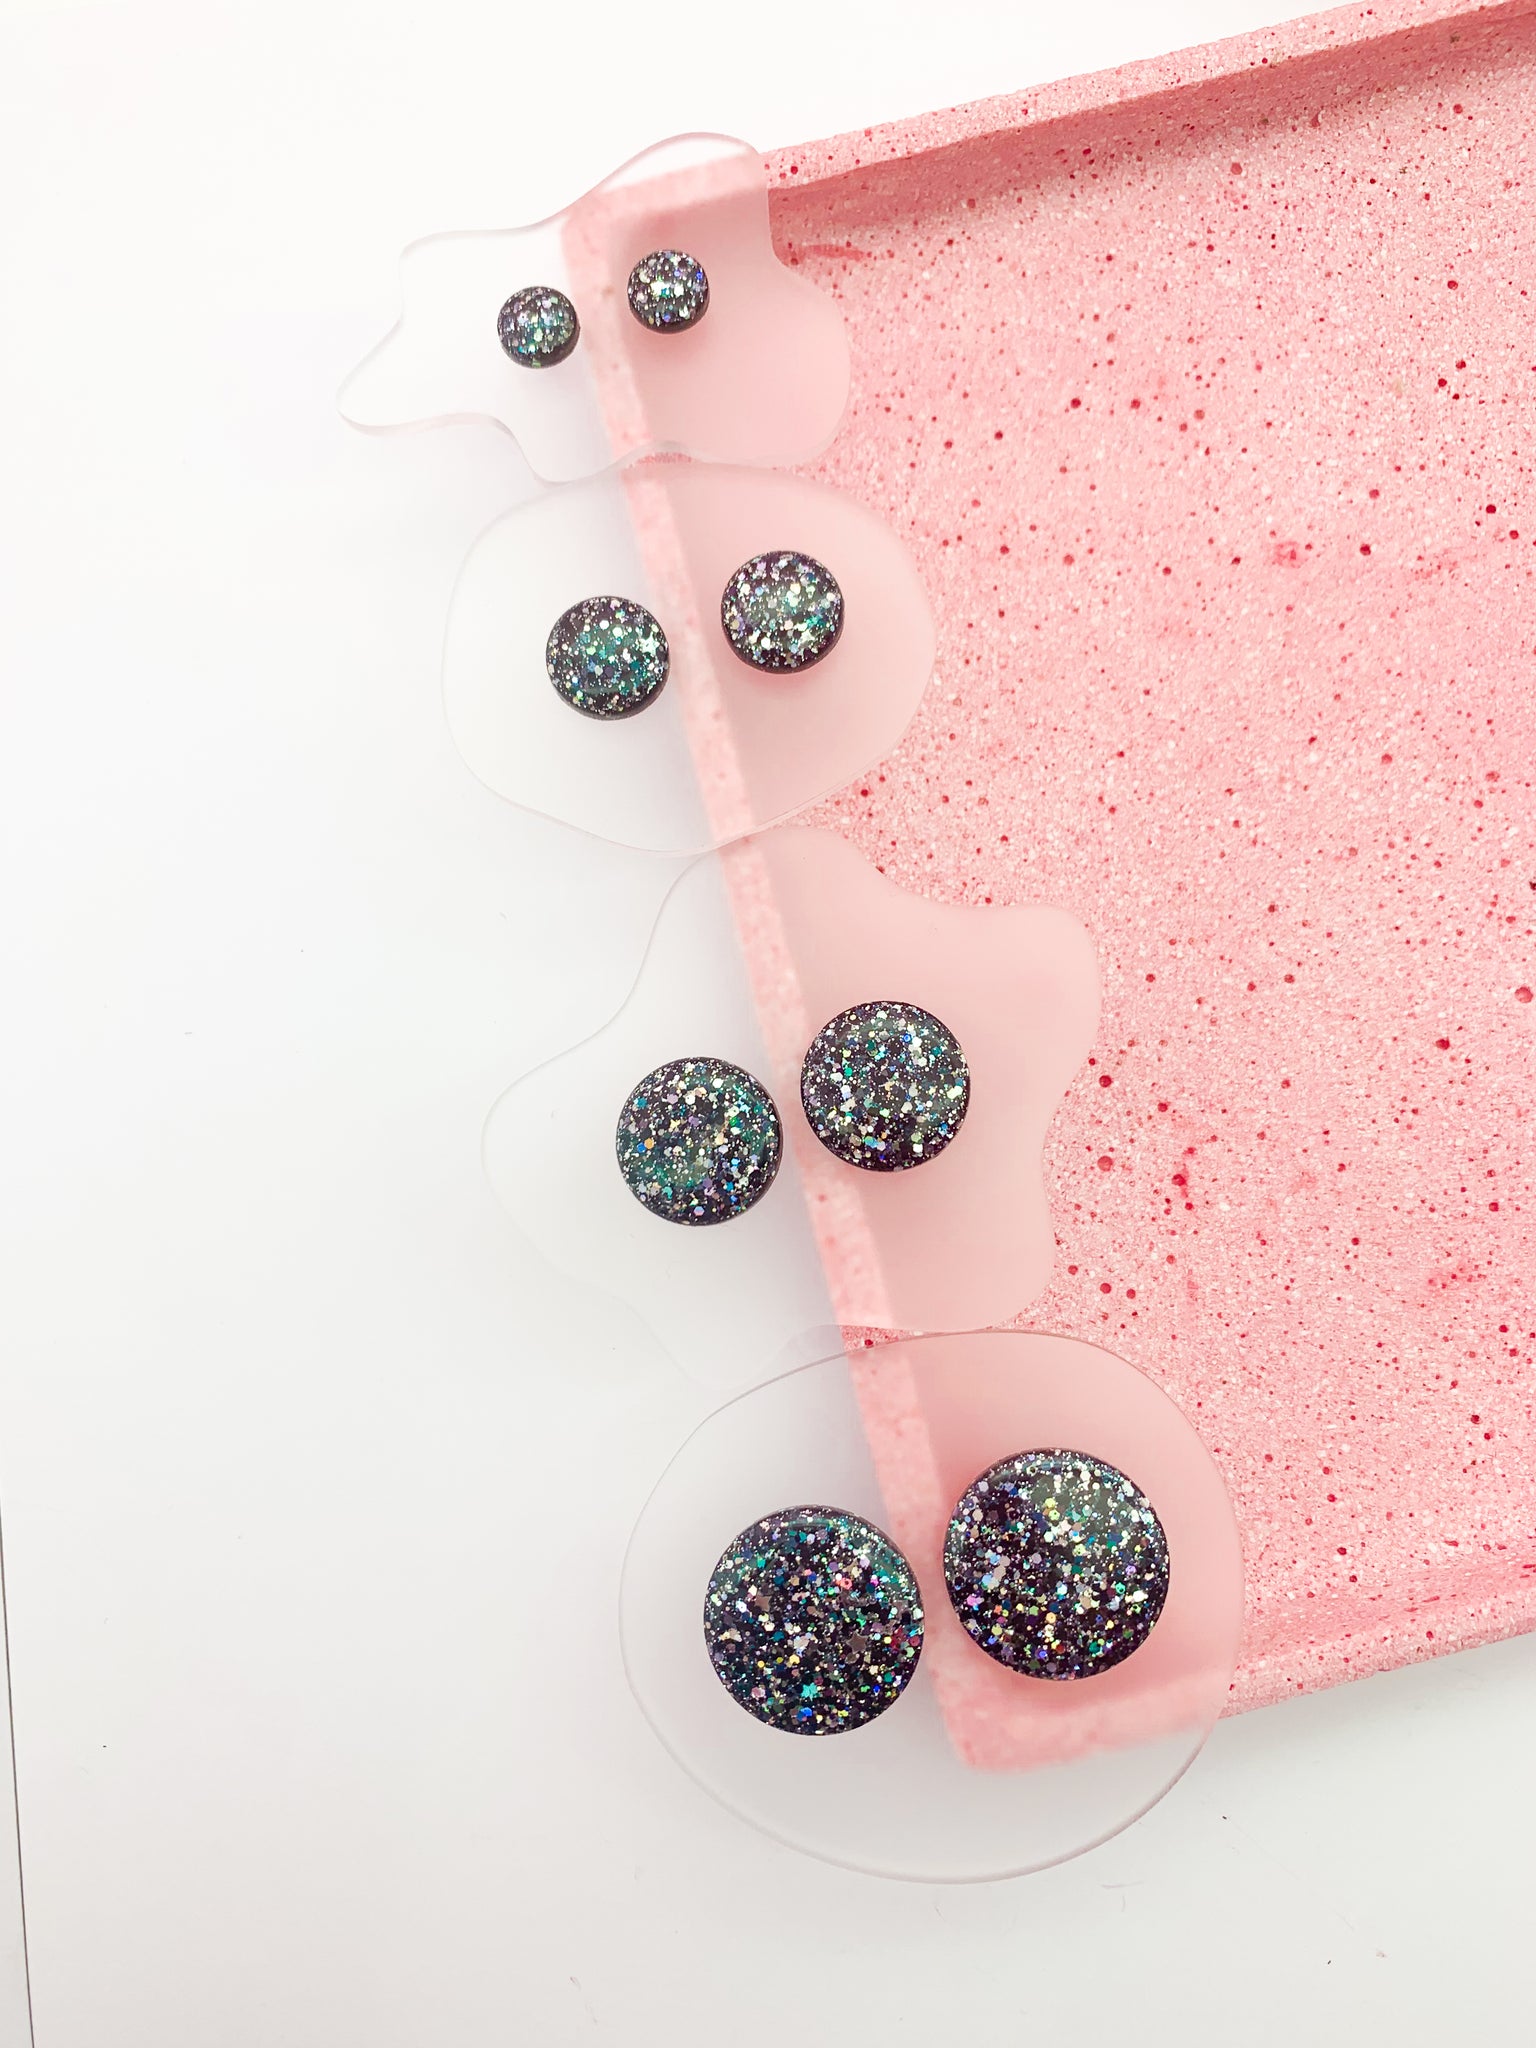 Galaxy SPARKLE Studs - Choose your size!